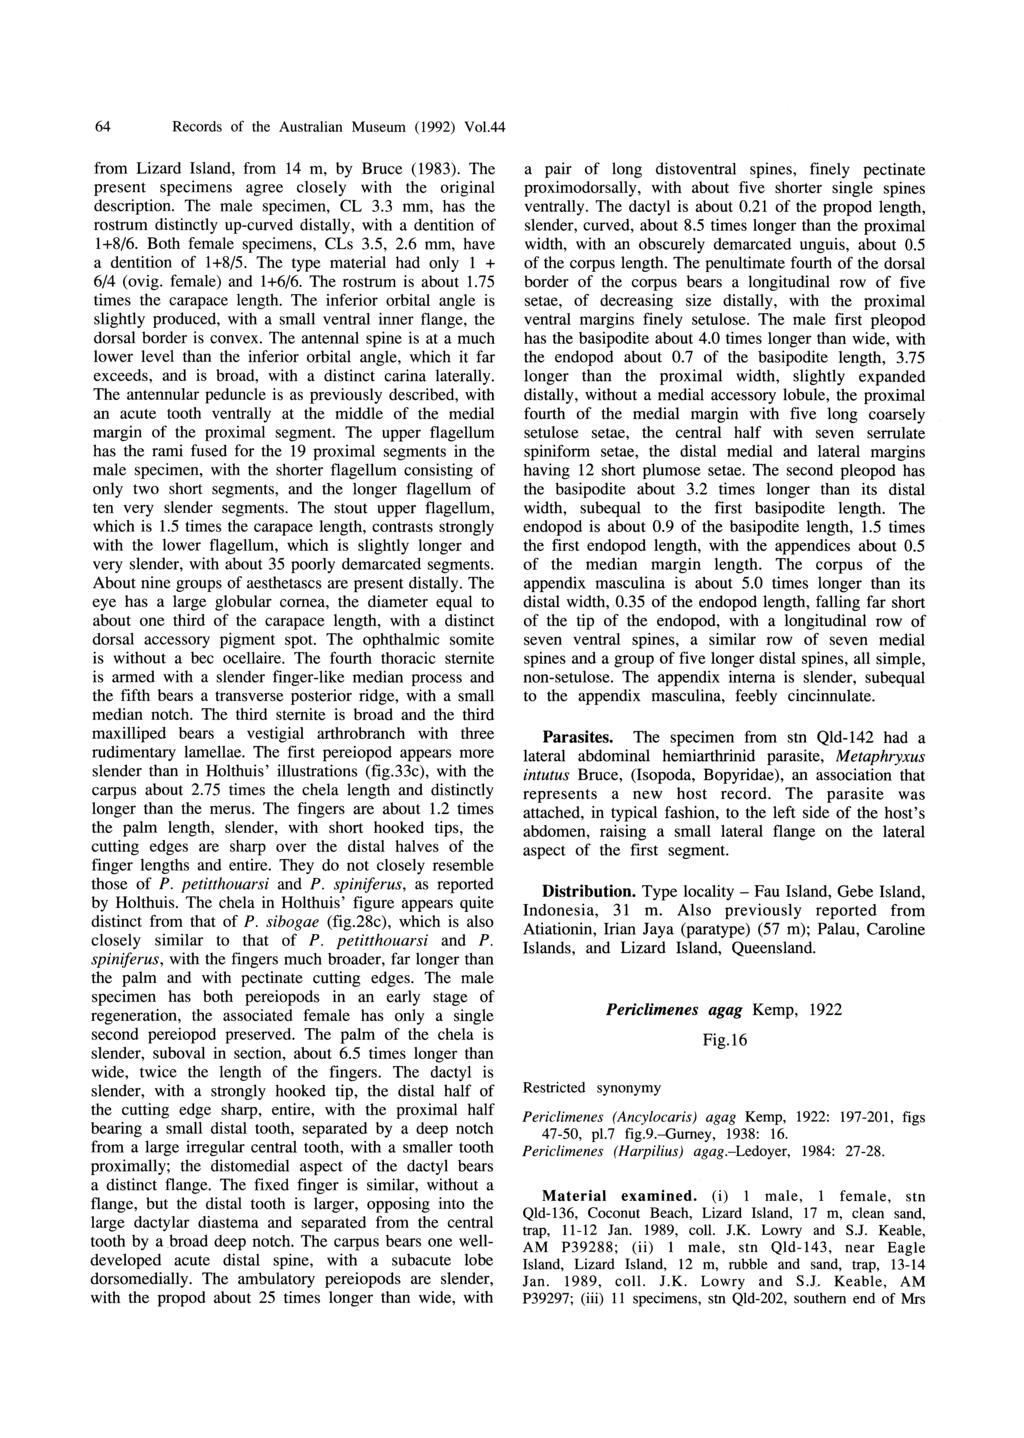 64 Records of the Australian Museum (1992) Vol.44 from Lizard Island, from 14 m, by ruce (1983). The present specimens agree closely with the original description. The male specimen, CL 3.